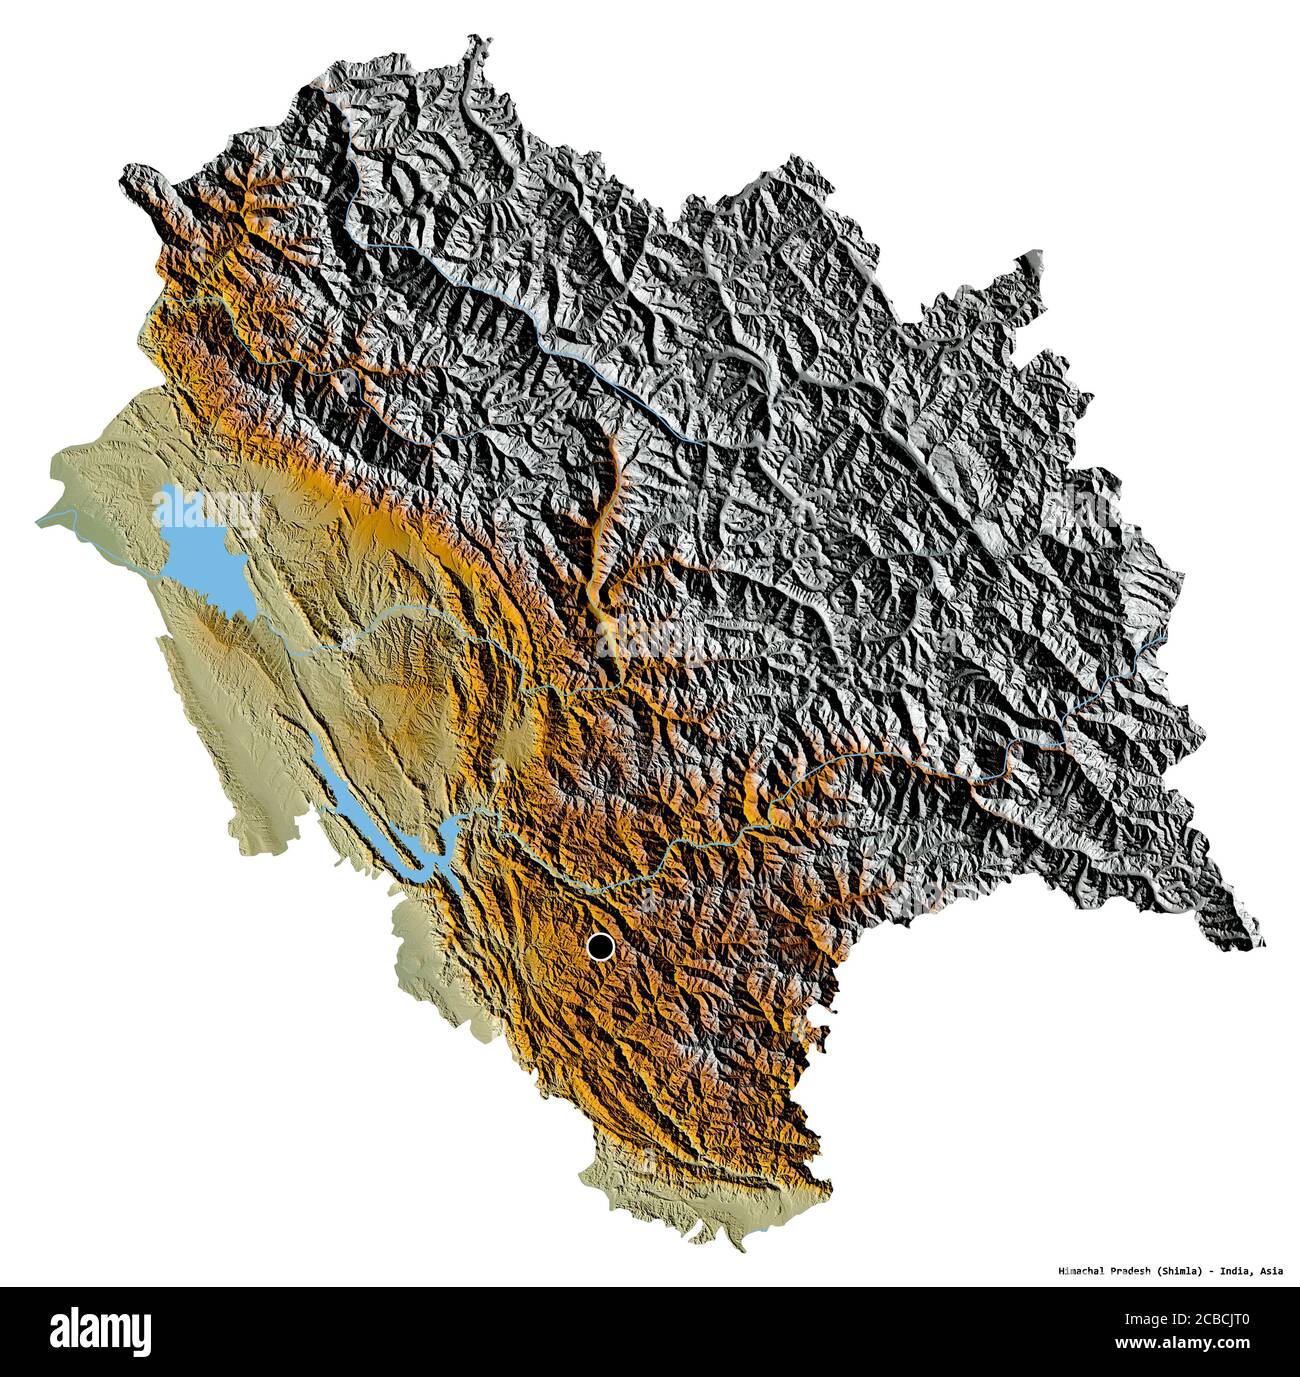 Shape of Himachal Pradesh, union territory of India, with its capital isolated on white background. Topographic relief map. 3D rendering Stock Photo